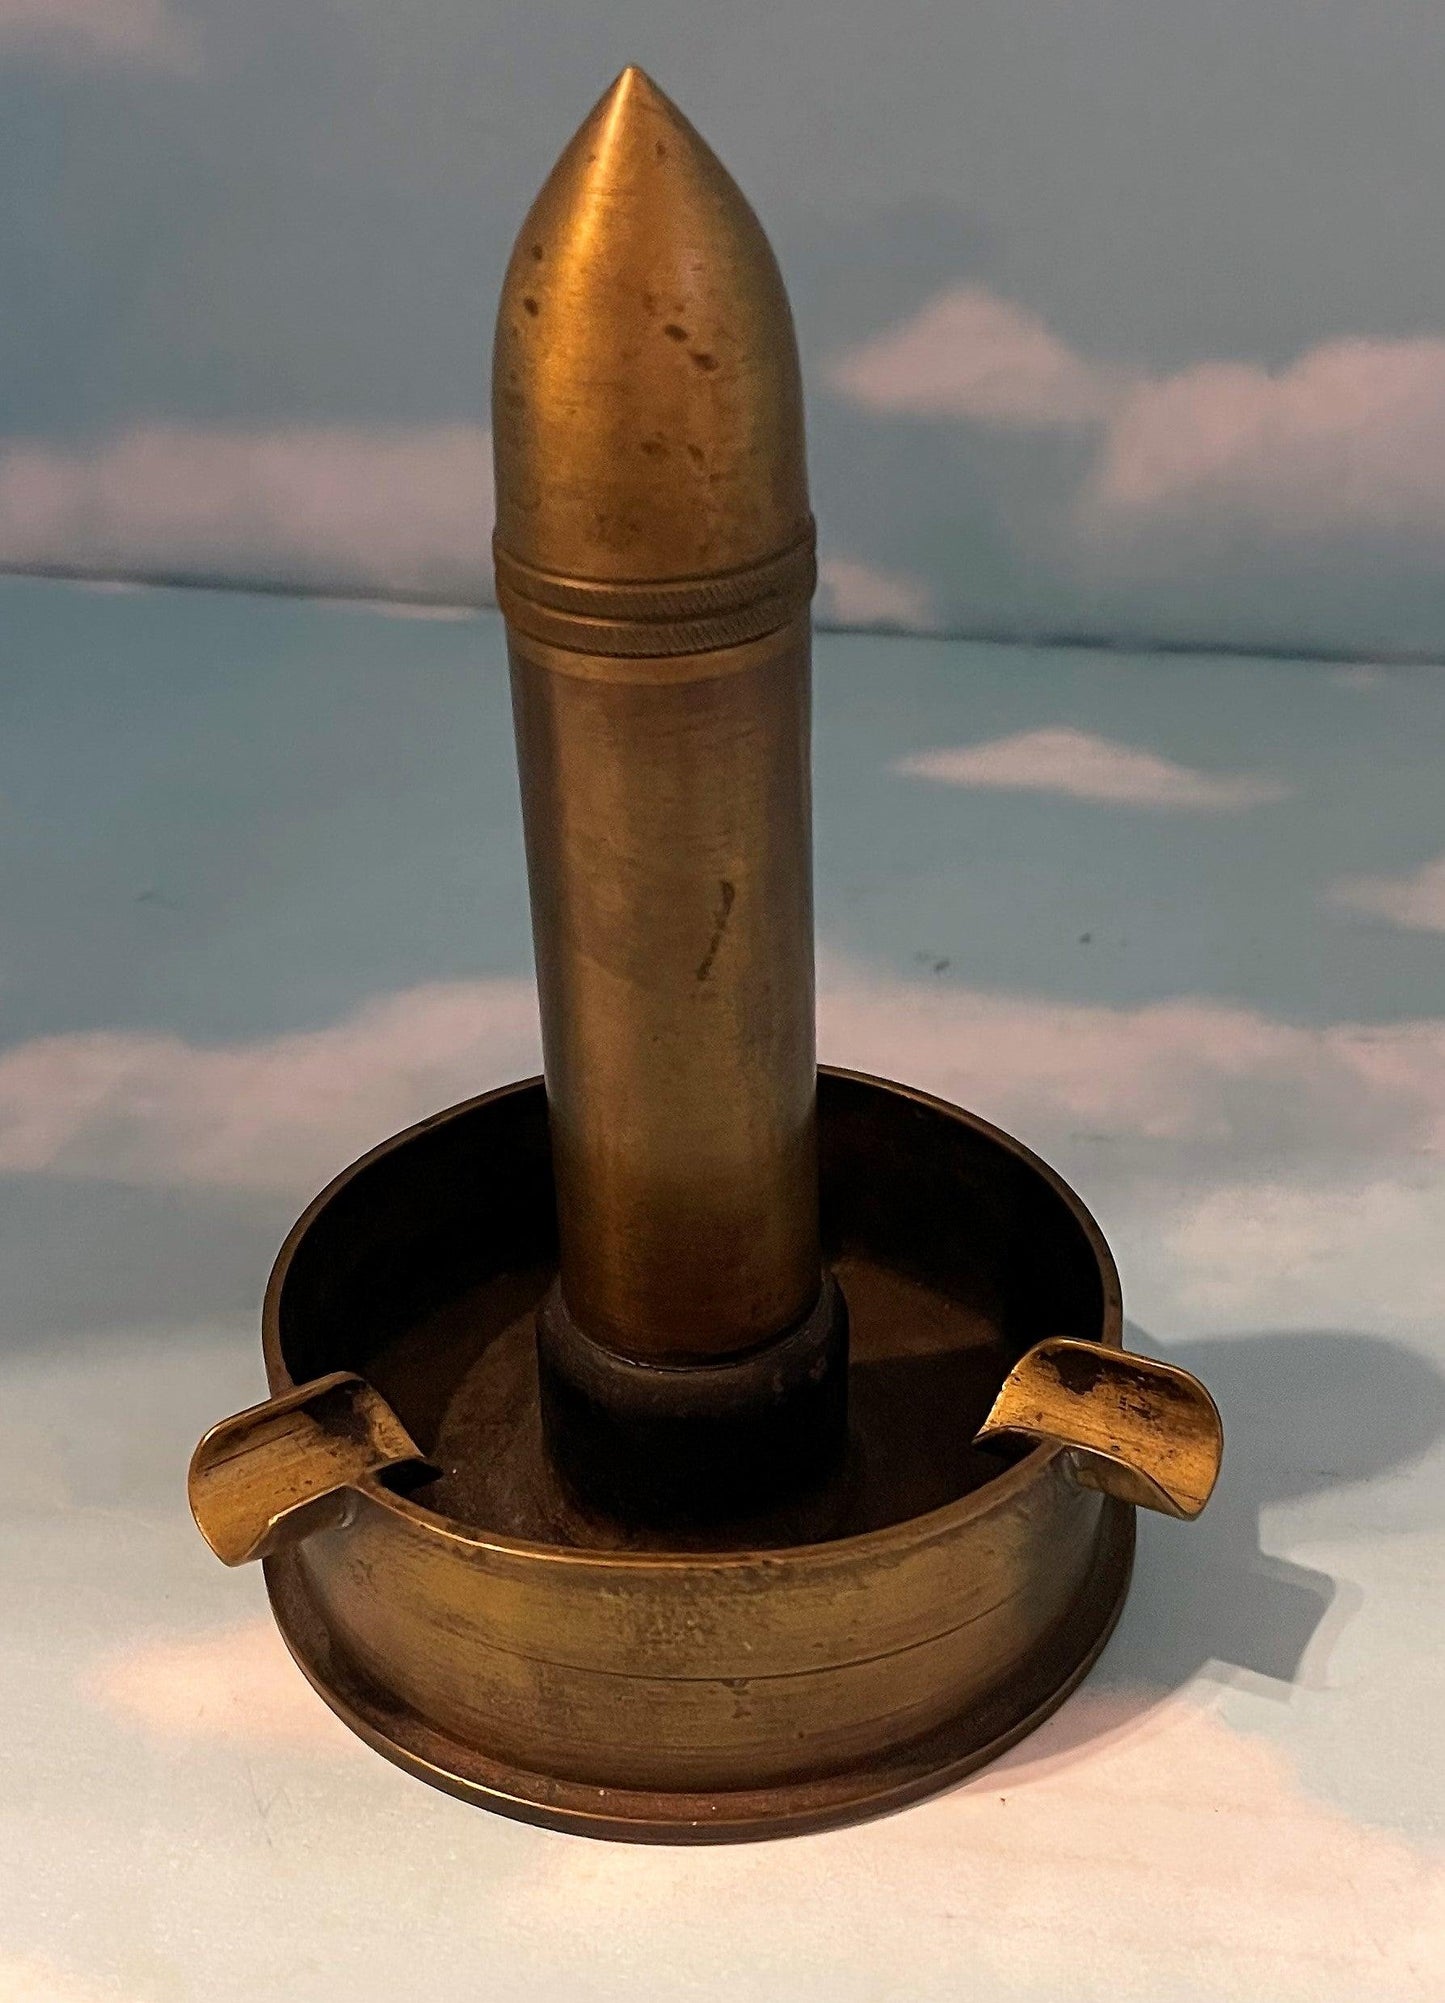 Germany Trench Art Ashtray and Lighter combination - Derrittmeister Militaria